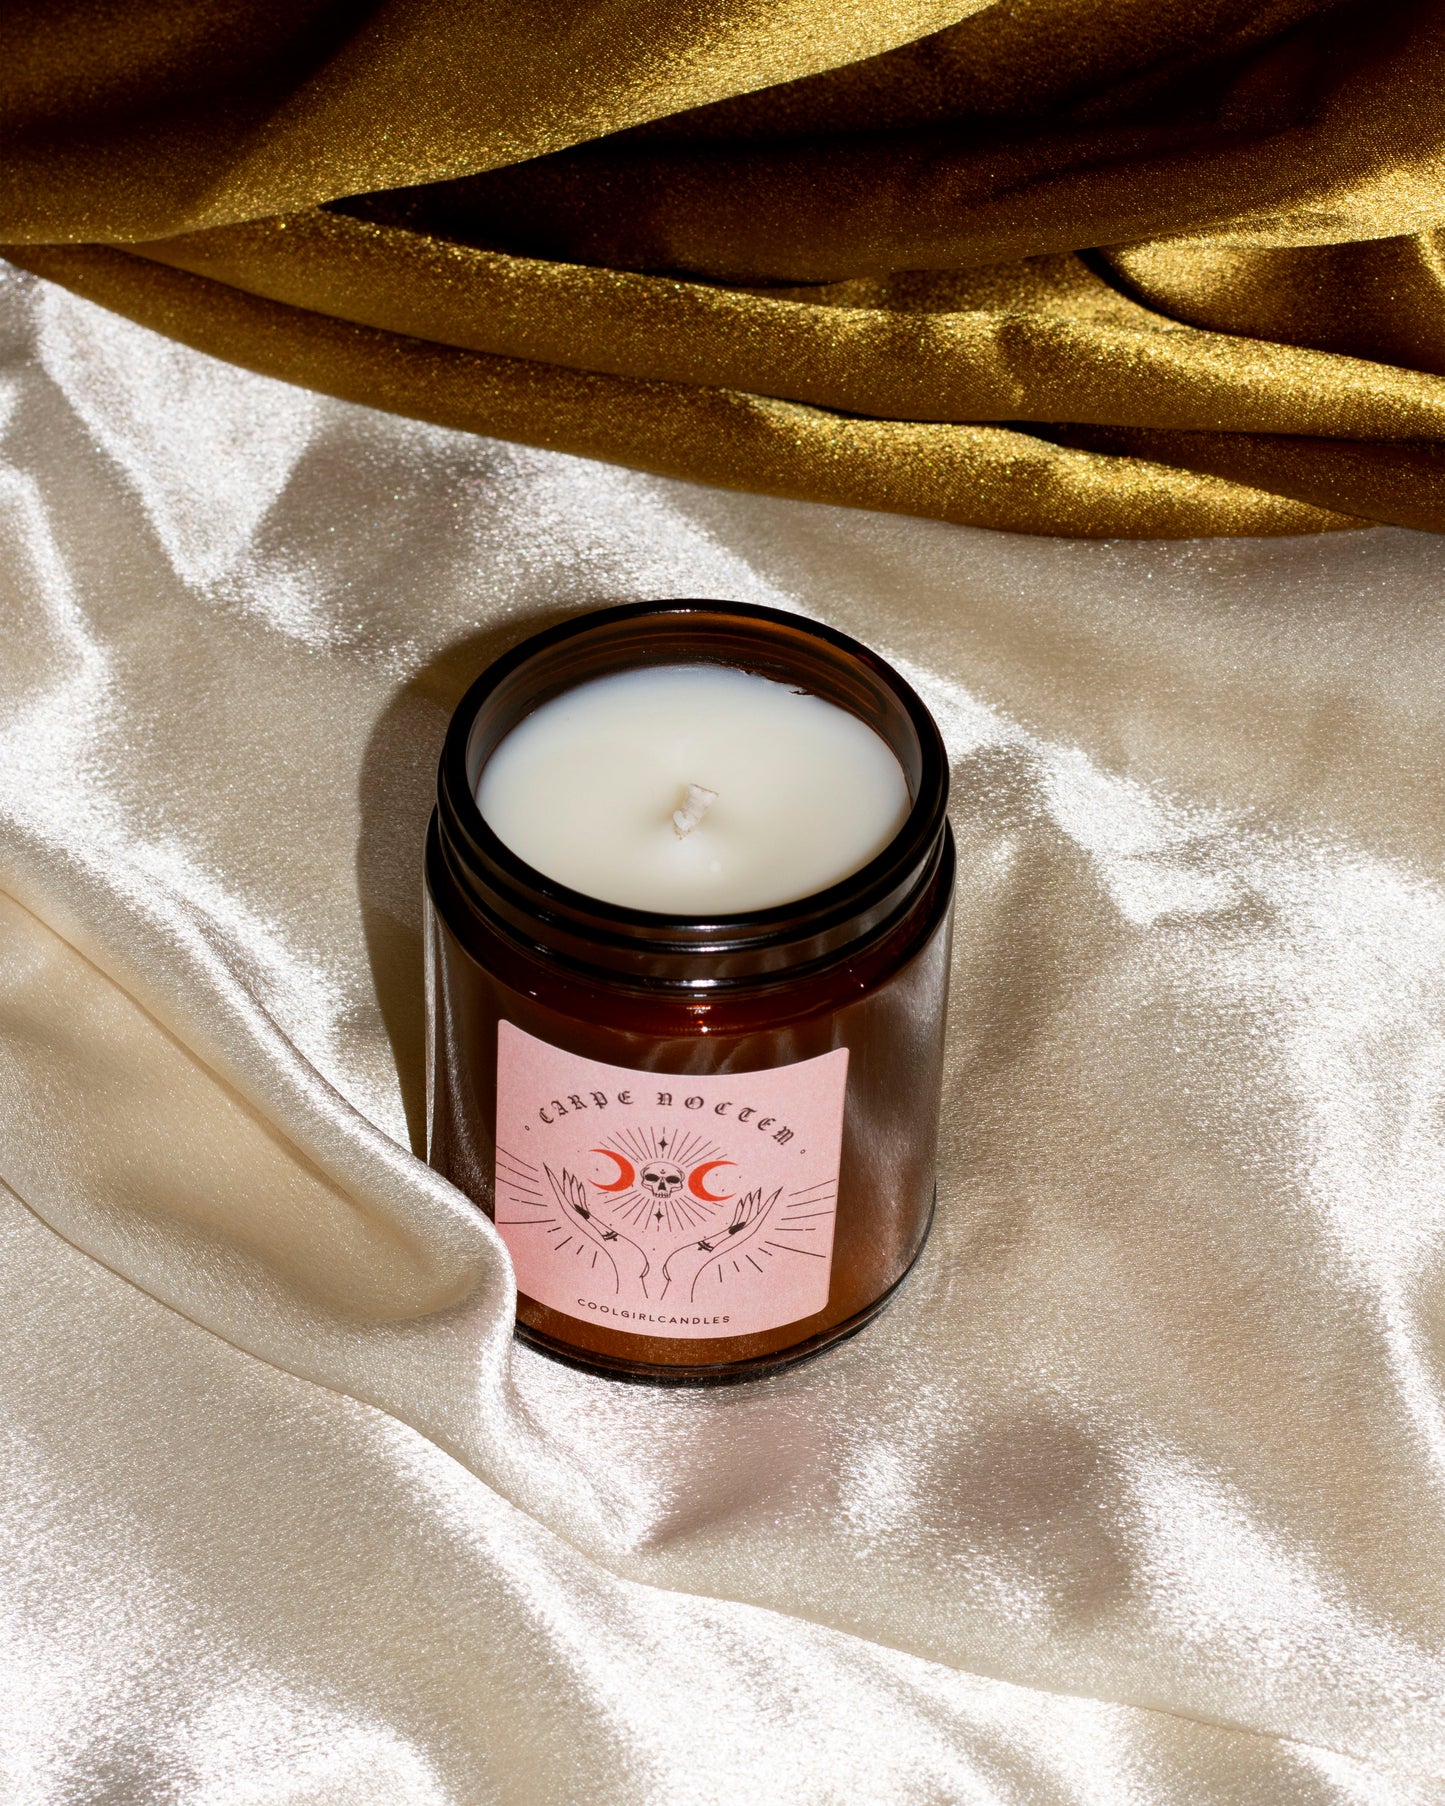 Fall 2020 candle with bergamot, lavender, and black pepper